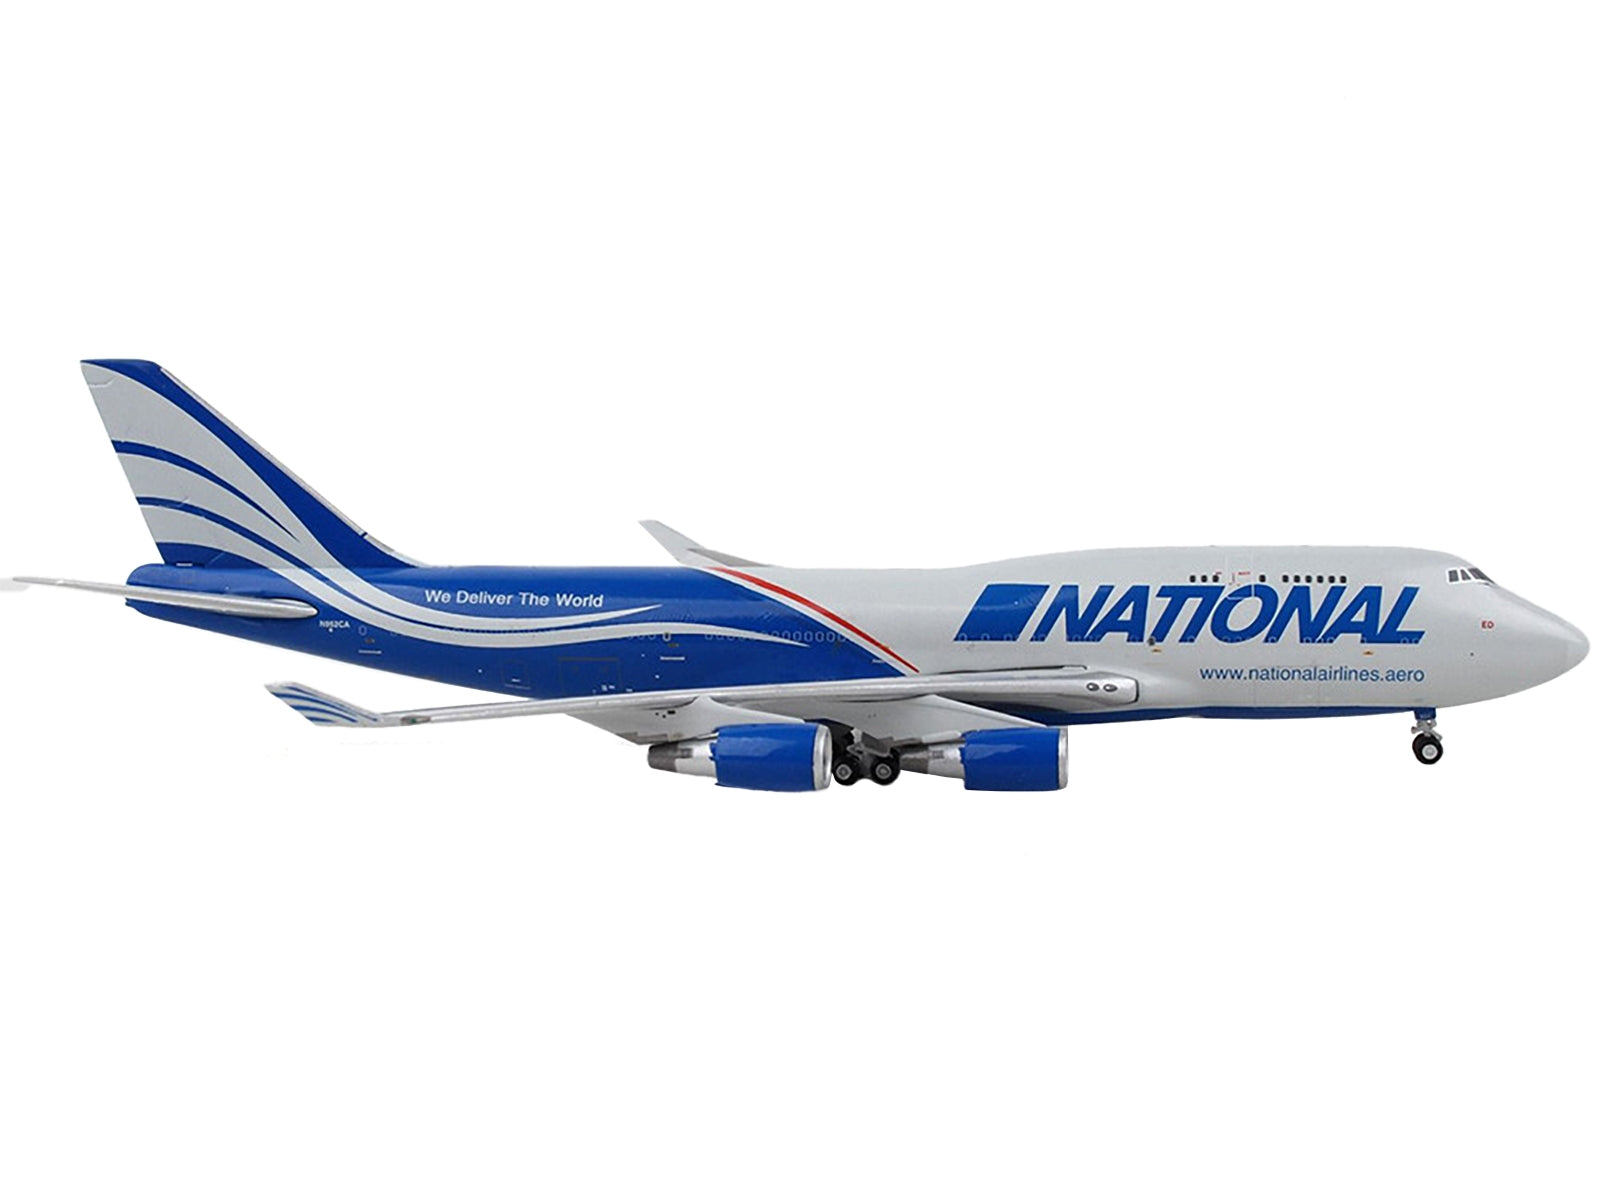 Boeing 747-400F Commercial Aircraft "National Airlines" Gray and Blue 1/400 Diecast Model Airplane by GeminiJets